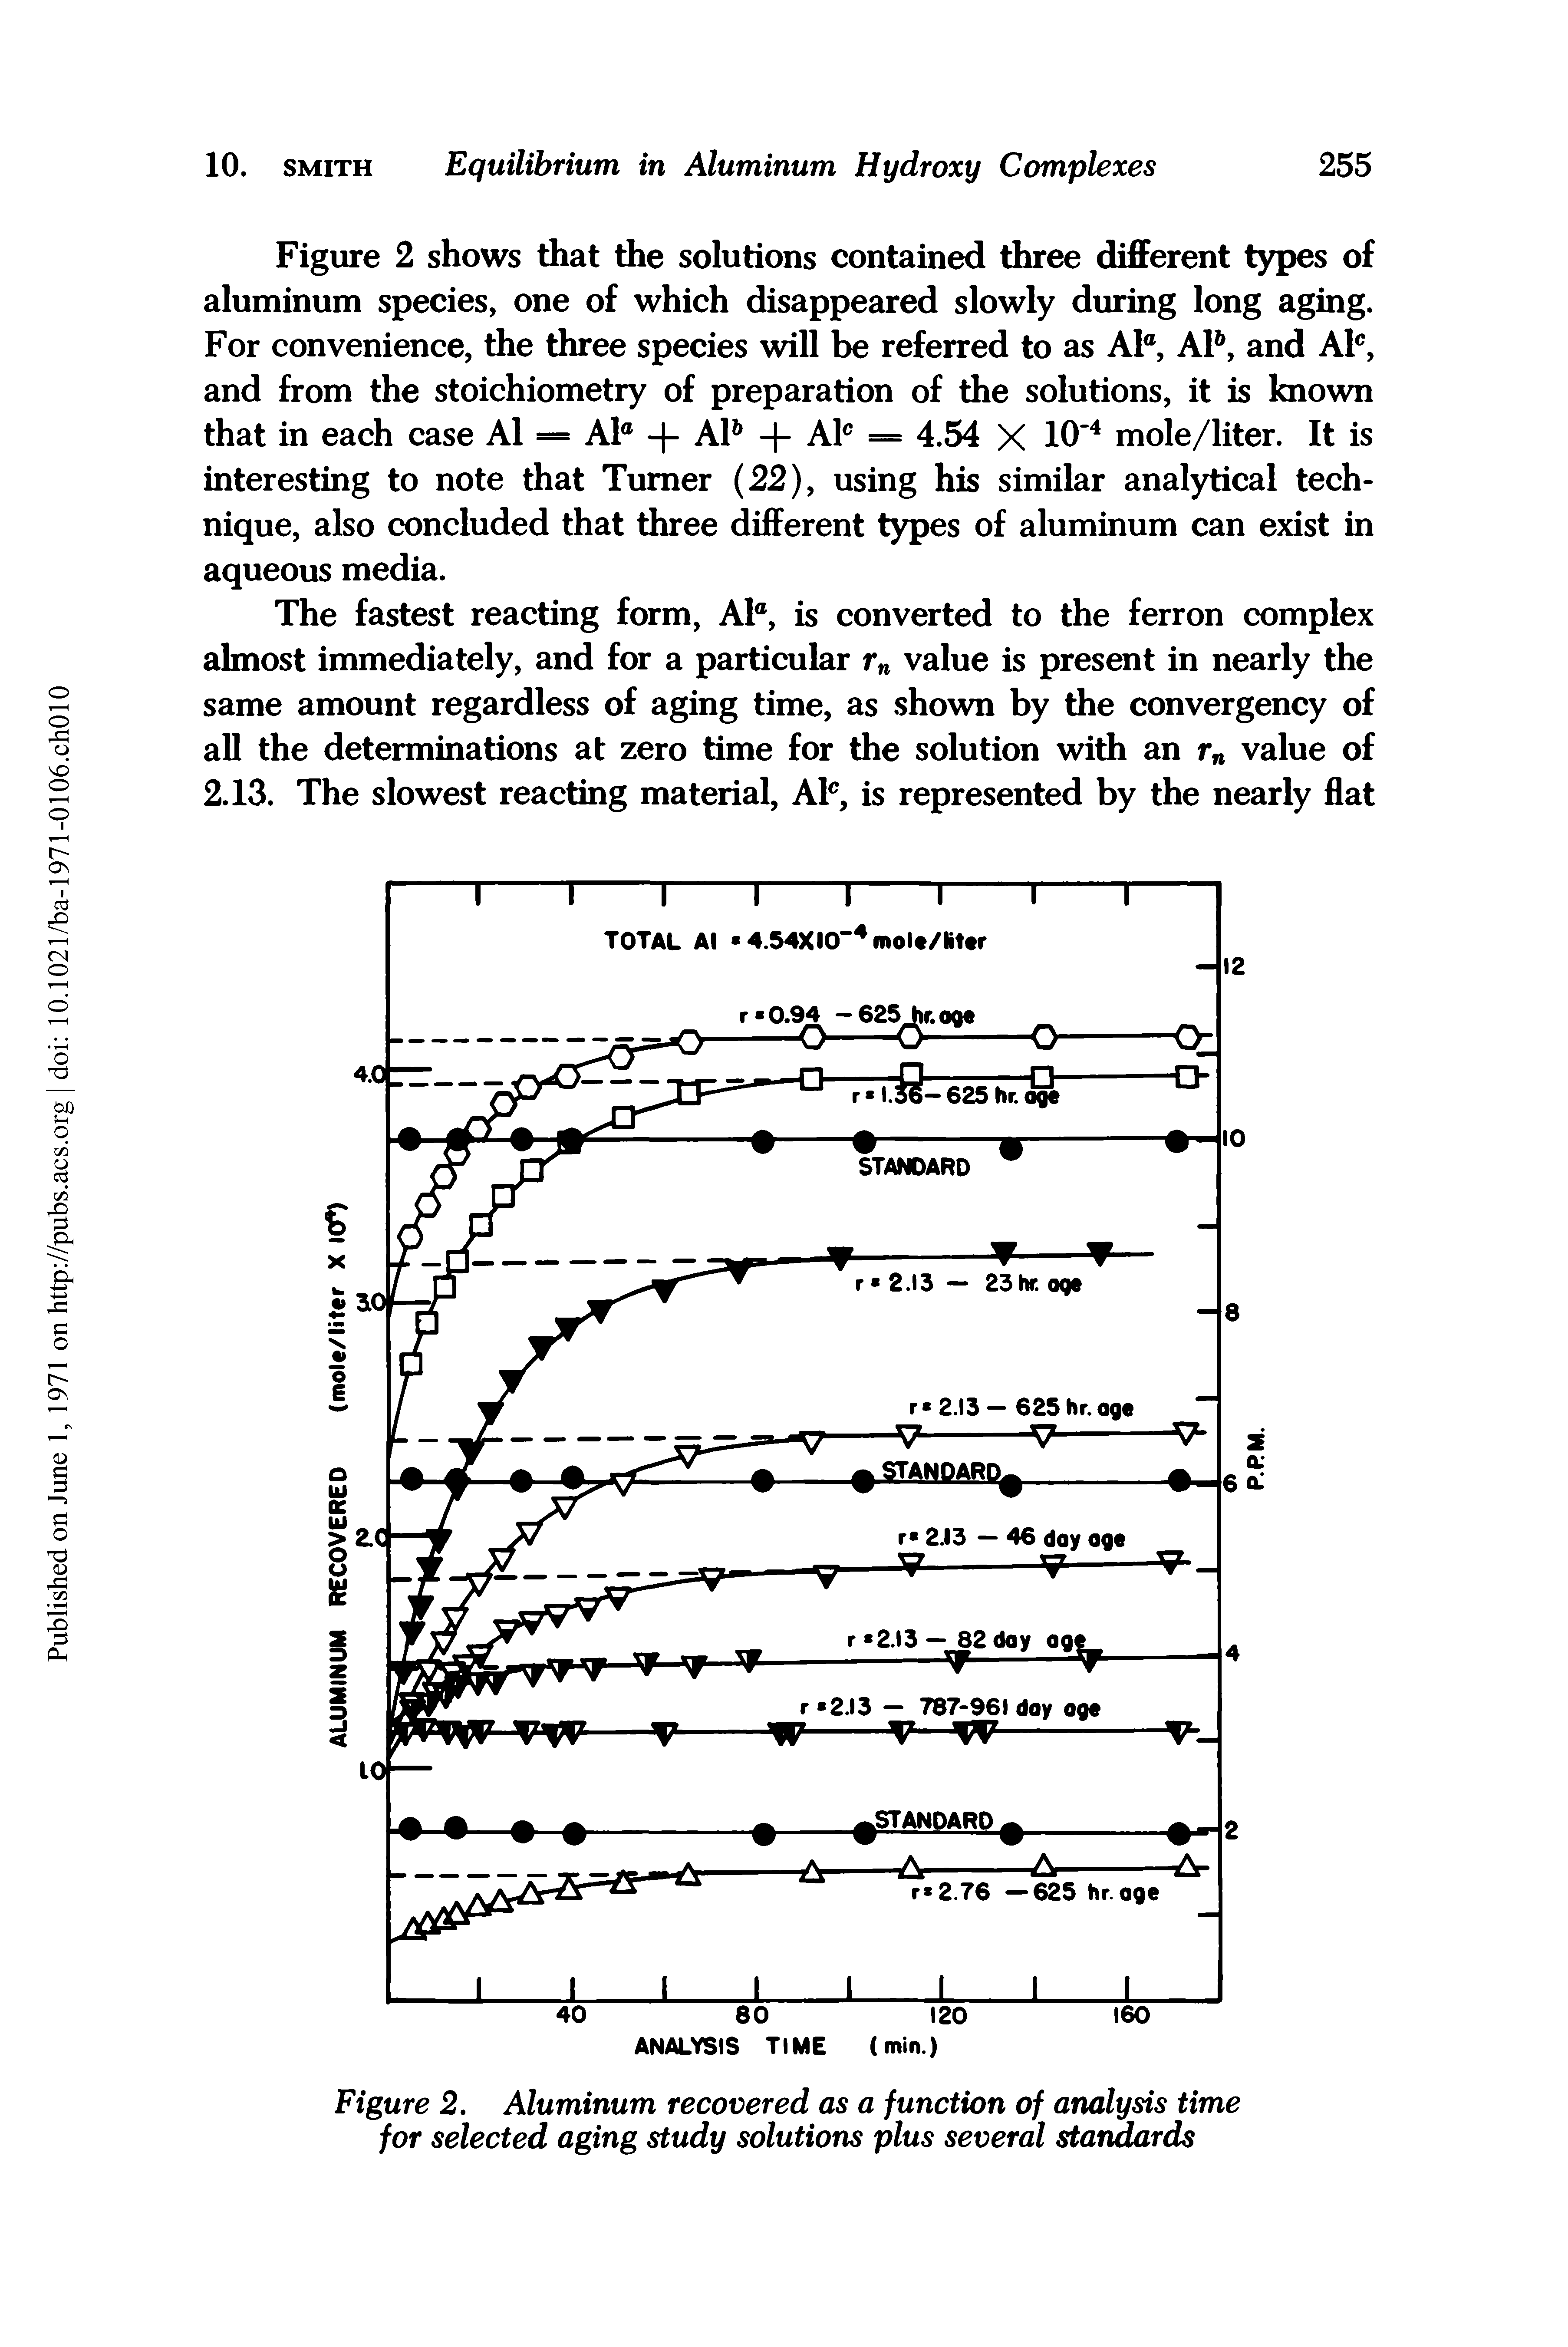 Figure 2. Aluminum recovered as a function of analysis time for selected aging study solutions plus several standards...